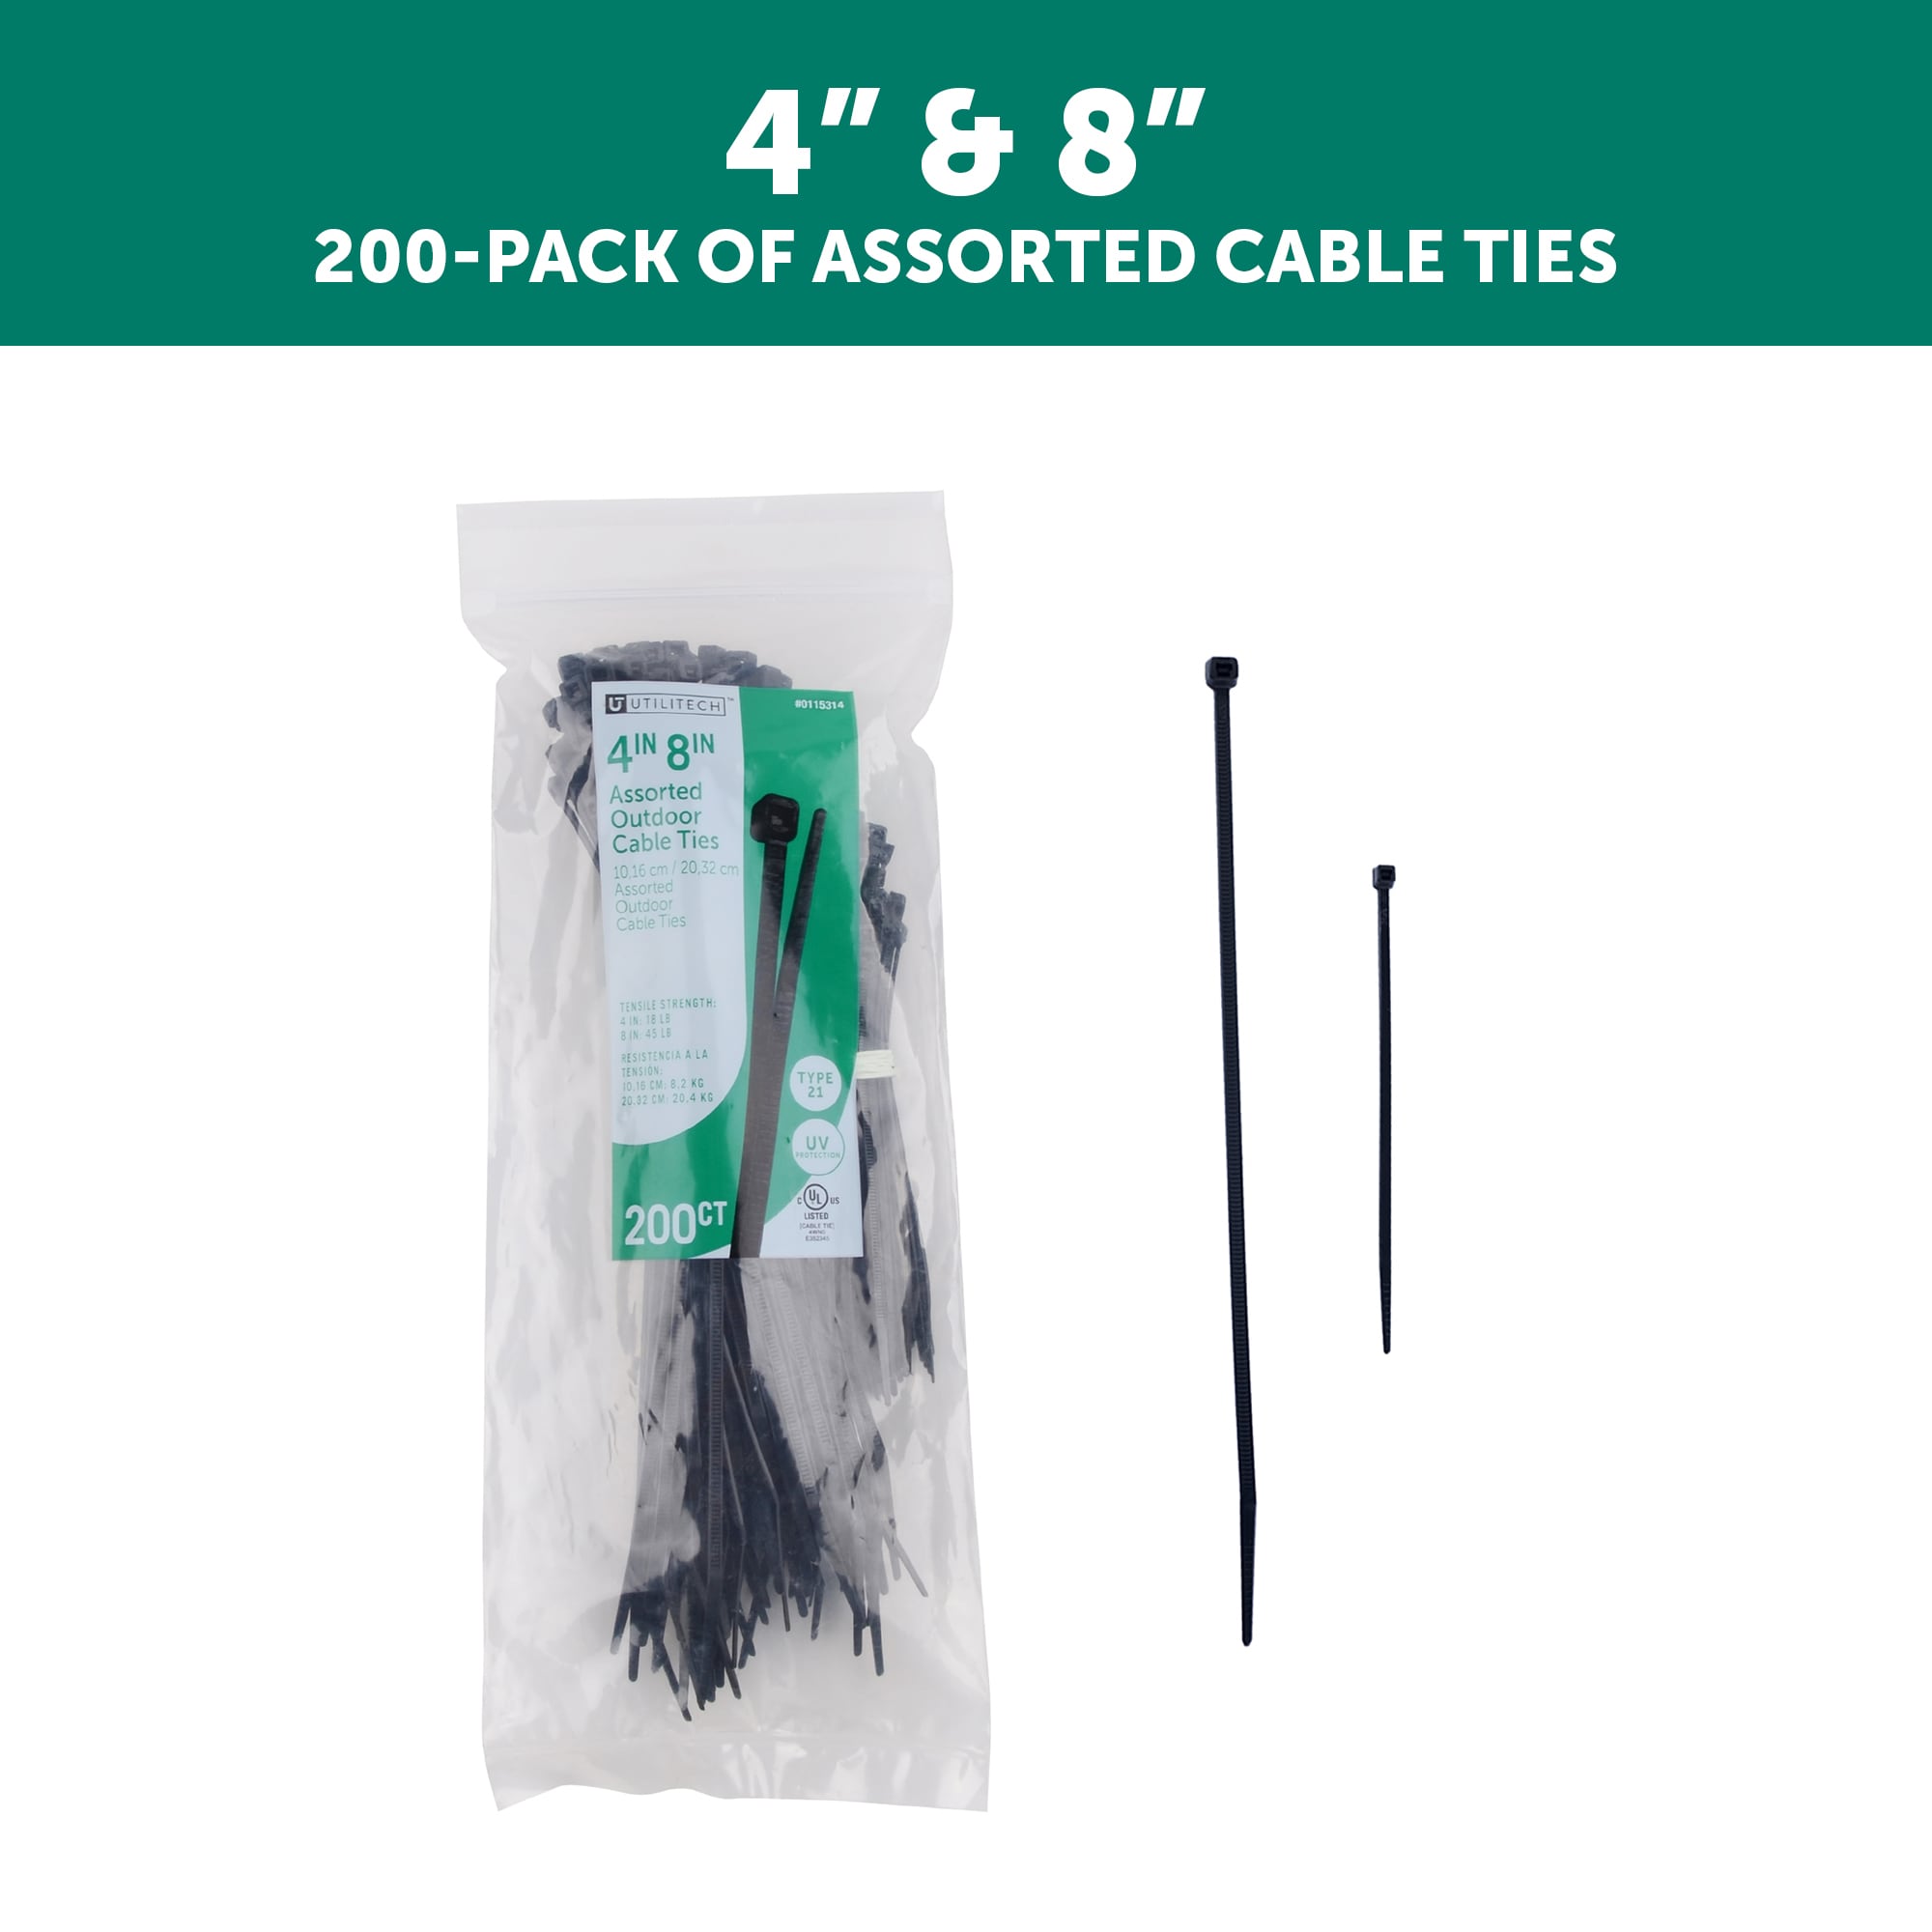 Utilitech 11-in Nylon Zip Ties Black with Uv Protection (20-Pack) in the Cable  Zip Ties department at